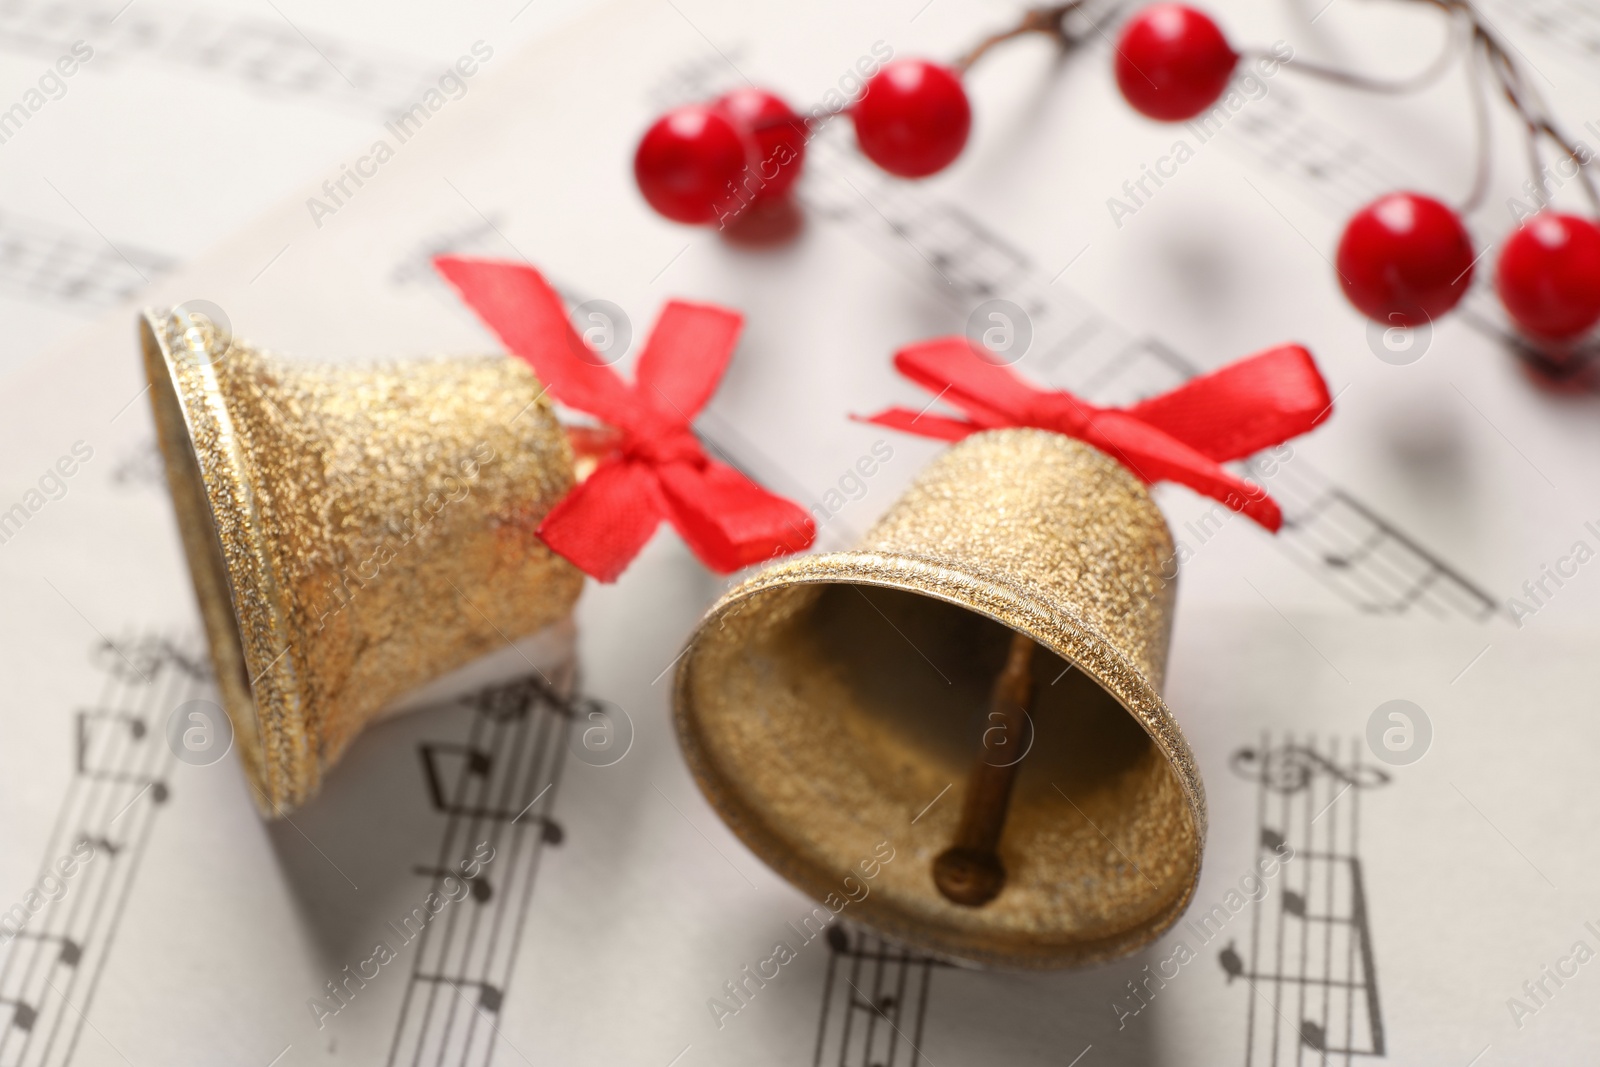 Photo of Golden shiny bells with red bows and decorative berries on music sheets, closeup. Christmas decoration